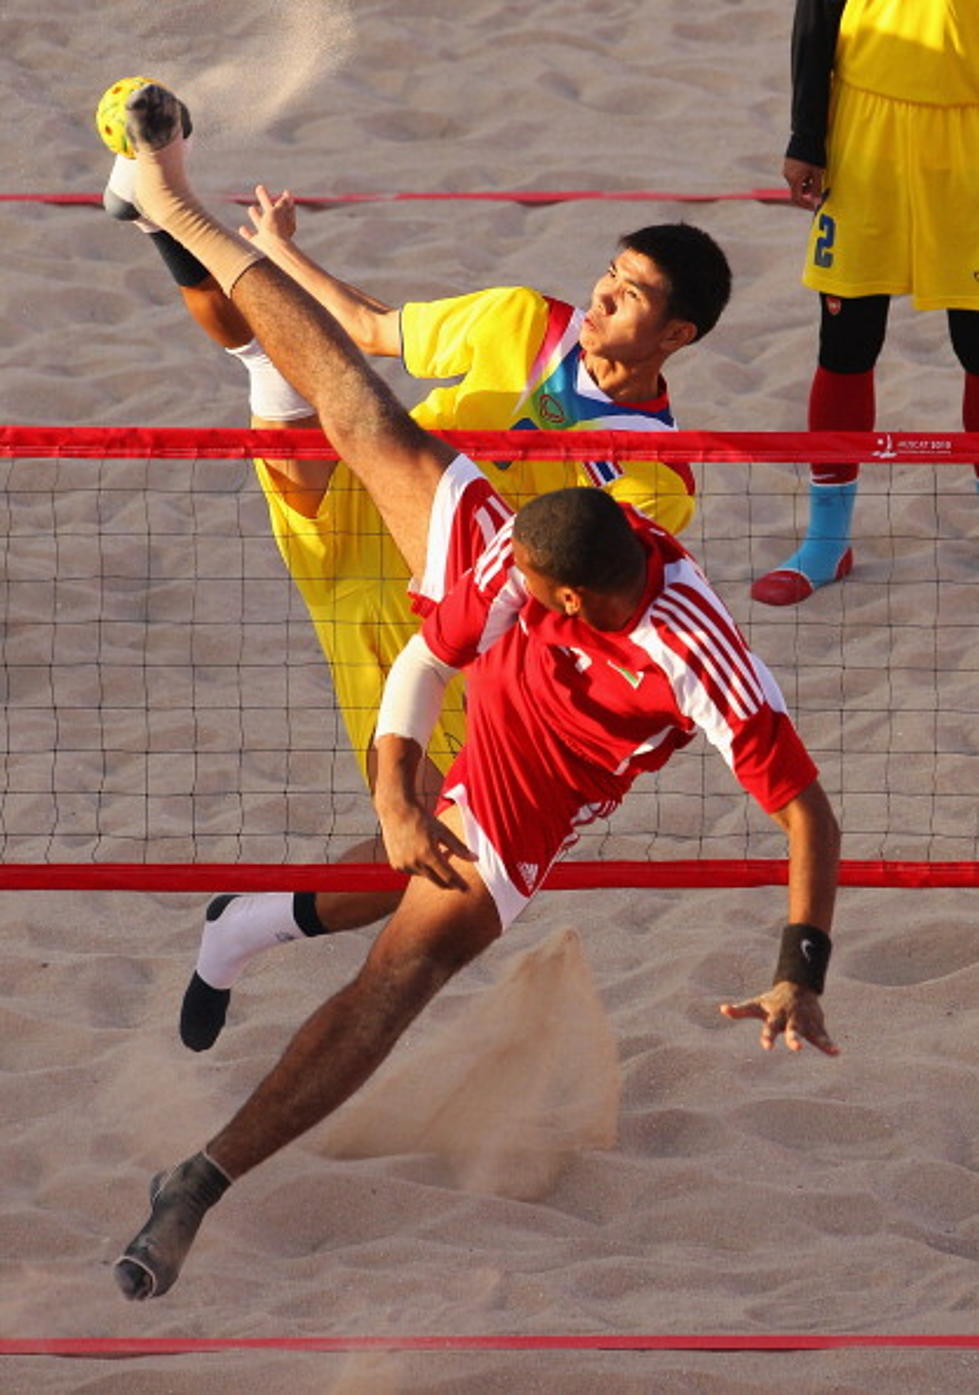 Pic Of The Day – Beach Sepaktakraw